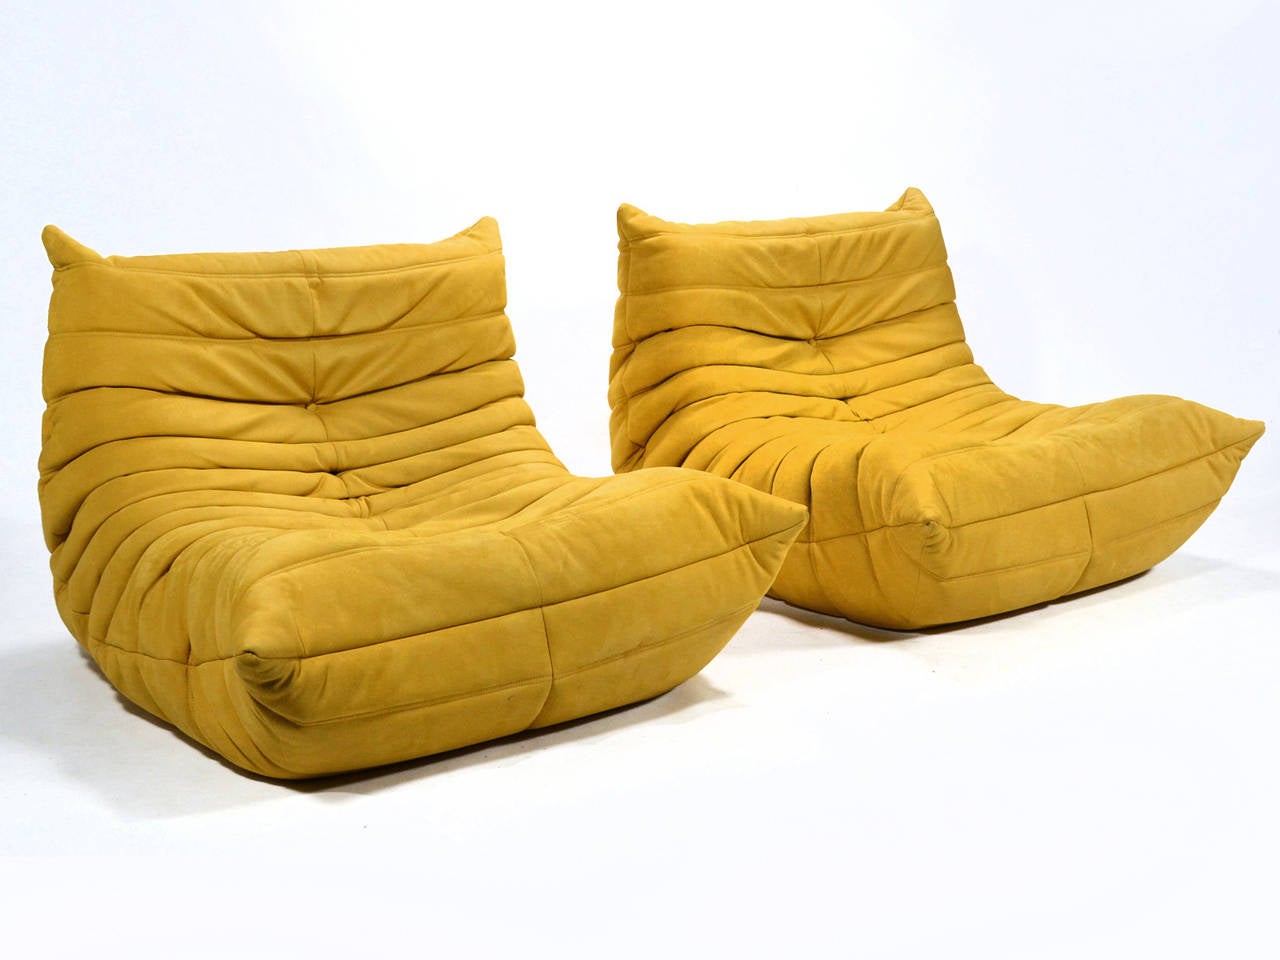 Designed in 1973 by Michel Ducaroy the Togo reflects the soft, relaxed organic design sensibility of its era. Supremely comfortable, the lounges have a core of multiple density foam wrapped in a quilted cover. This pair is upholstered in a rich